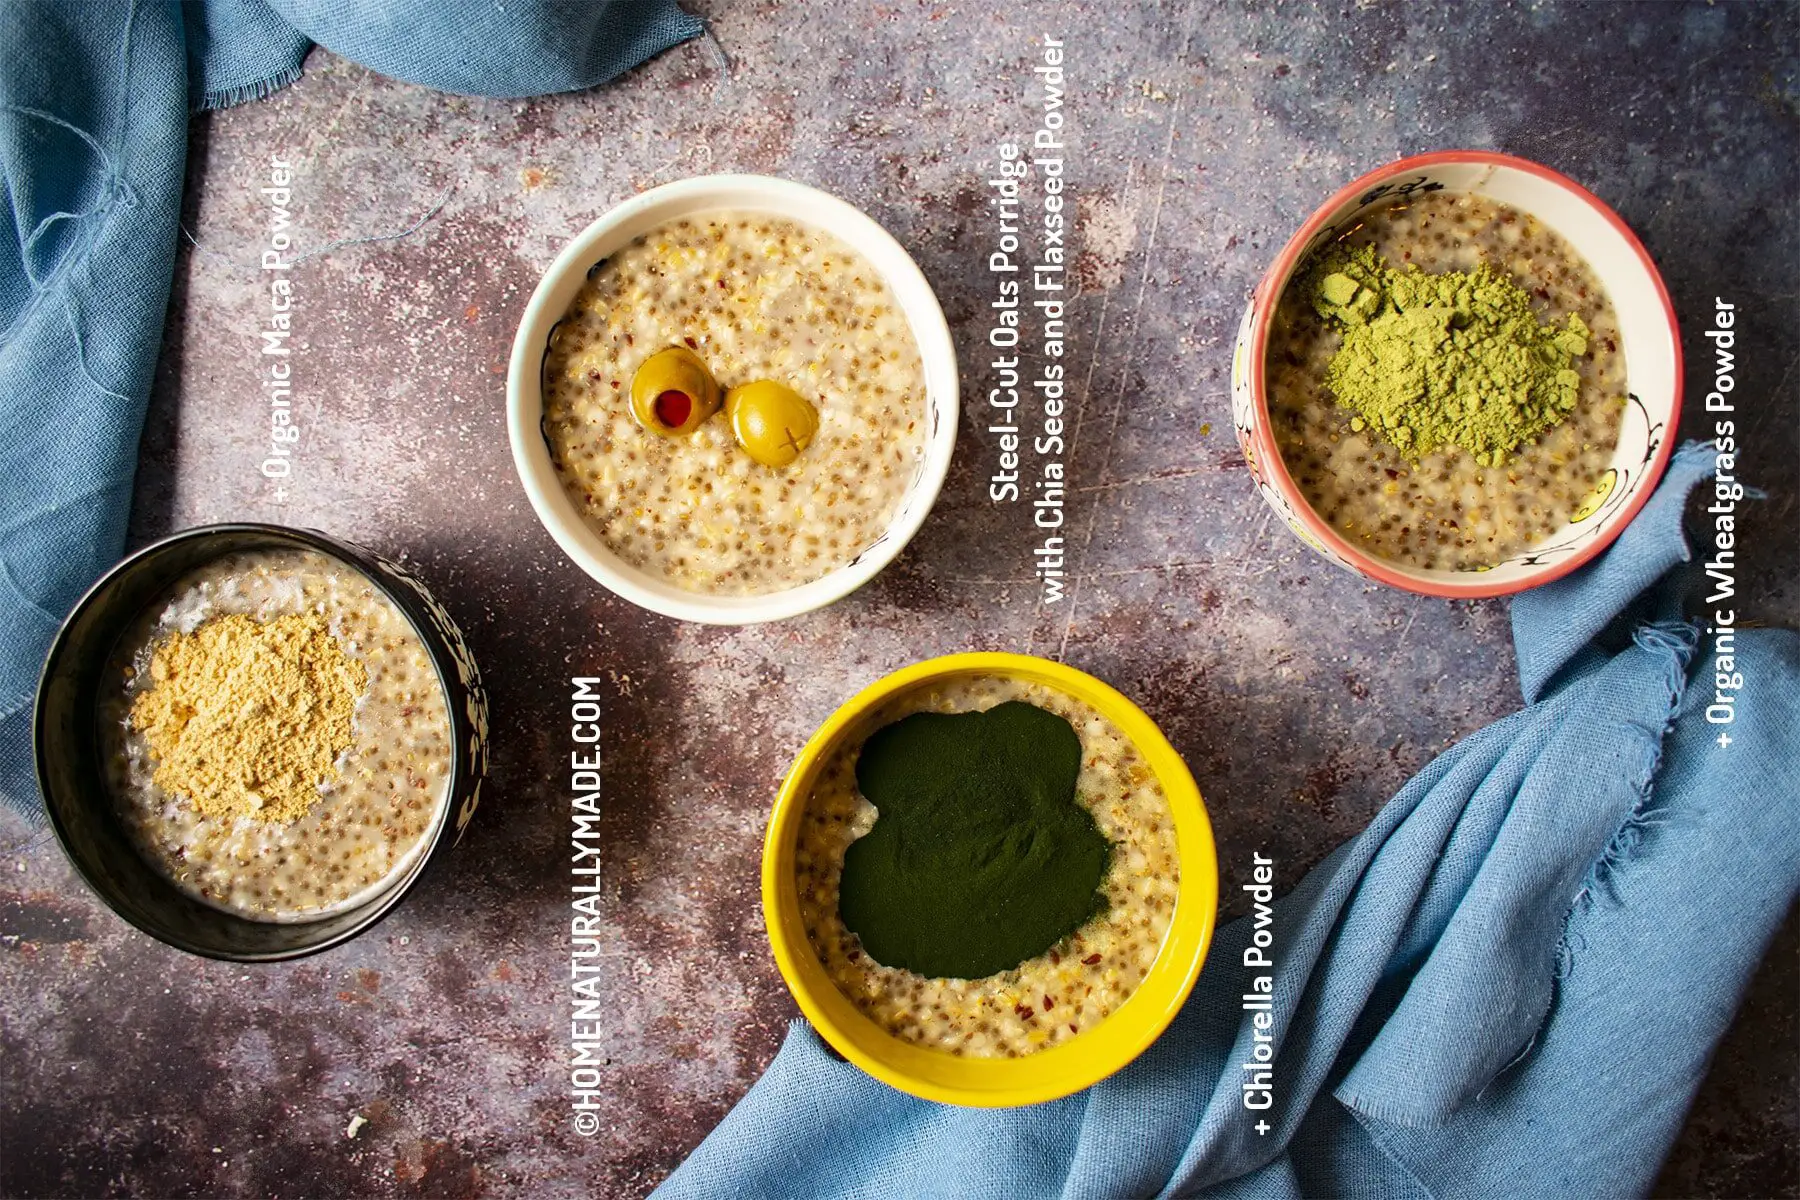 Steel-Cut Oats with superfood powder toppings